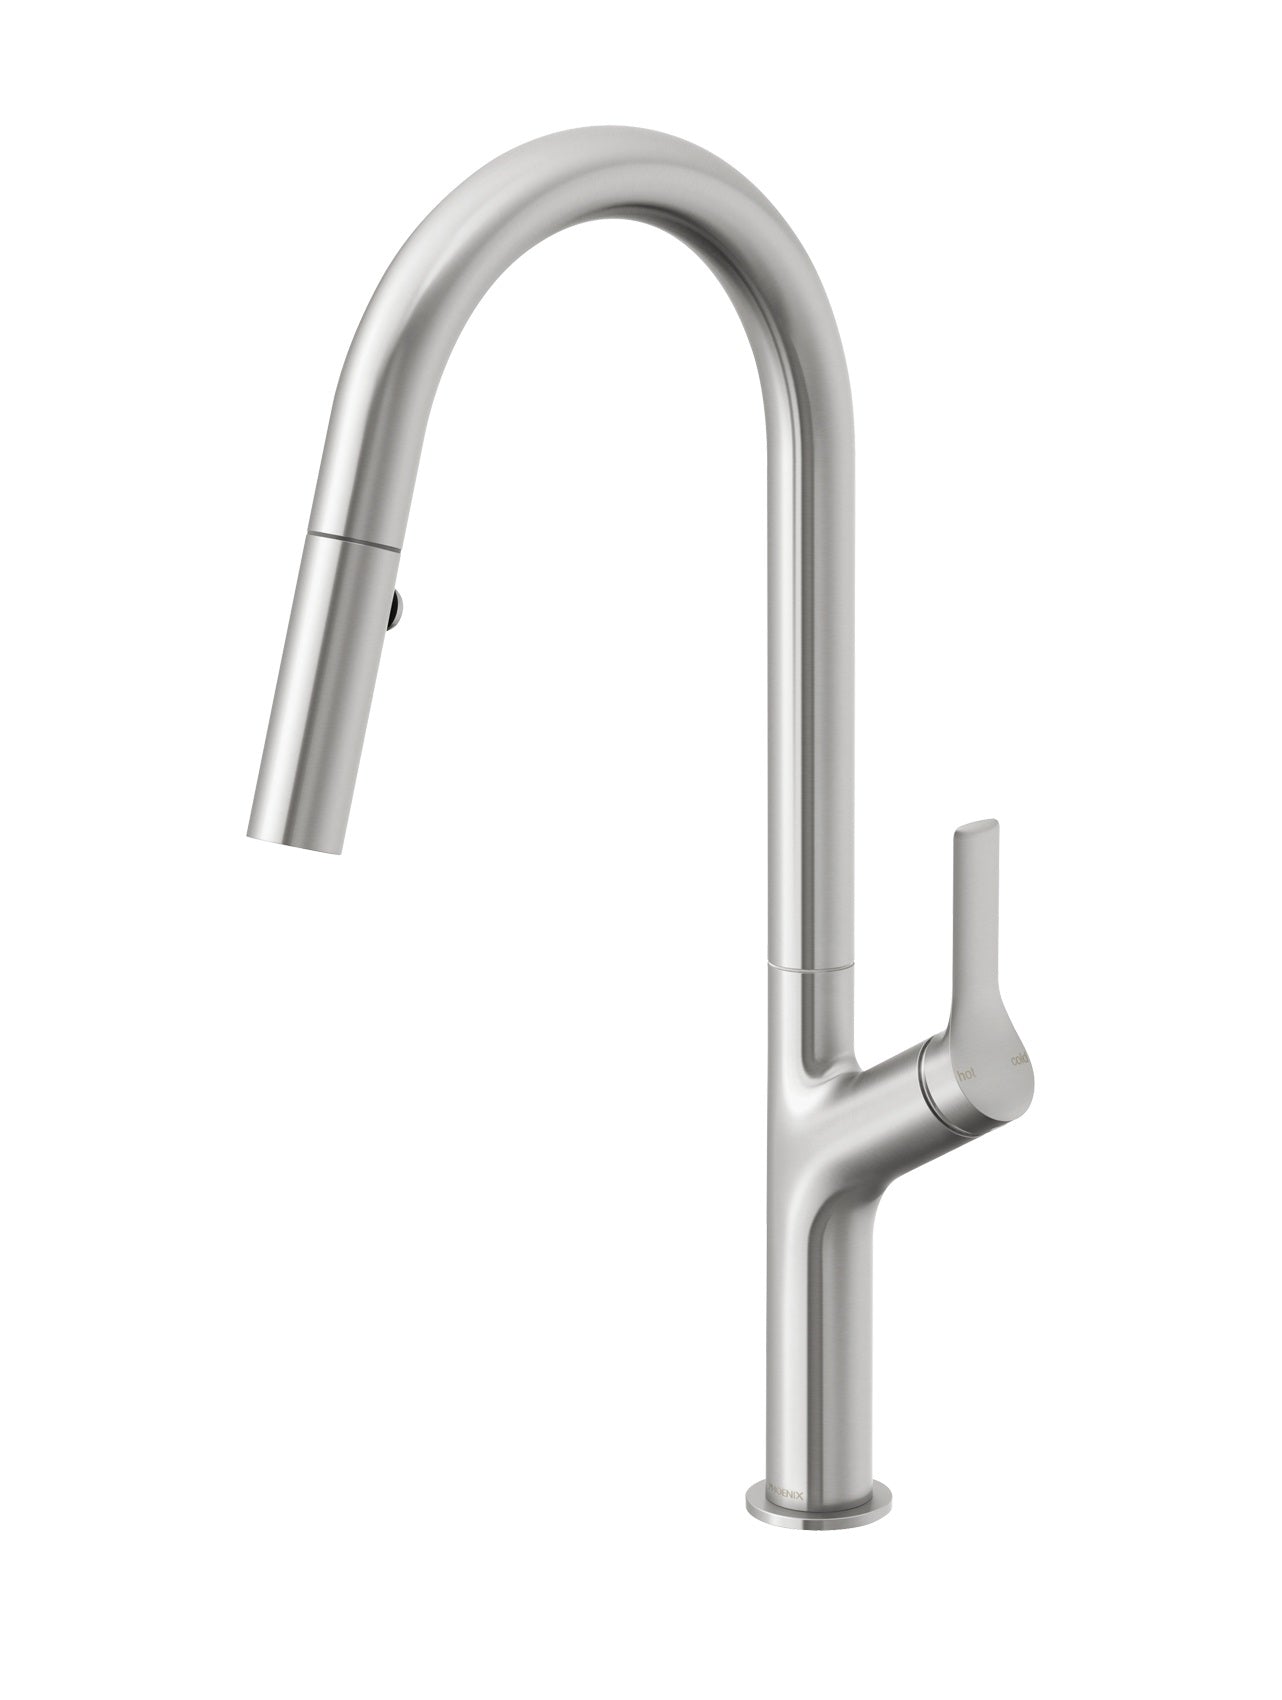 PHOENIX LINQ PULL OUT SINK MIXER STAINLESS STEEL